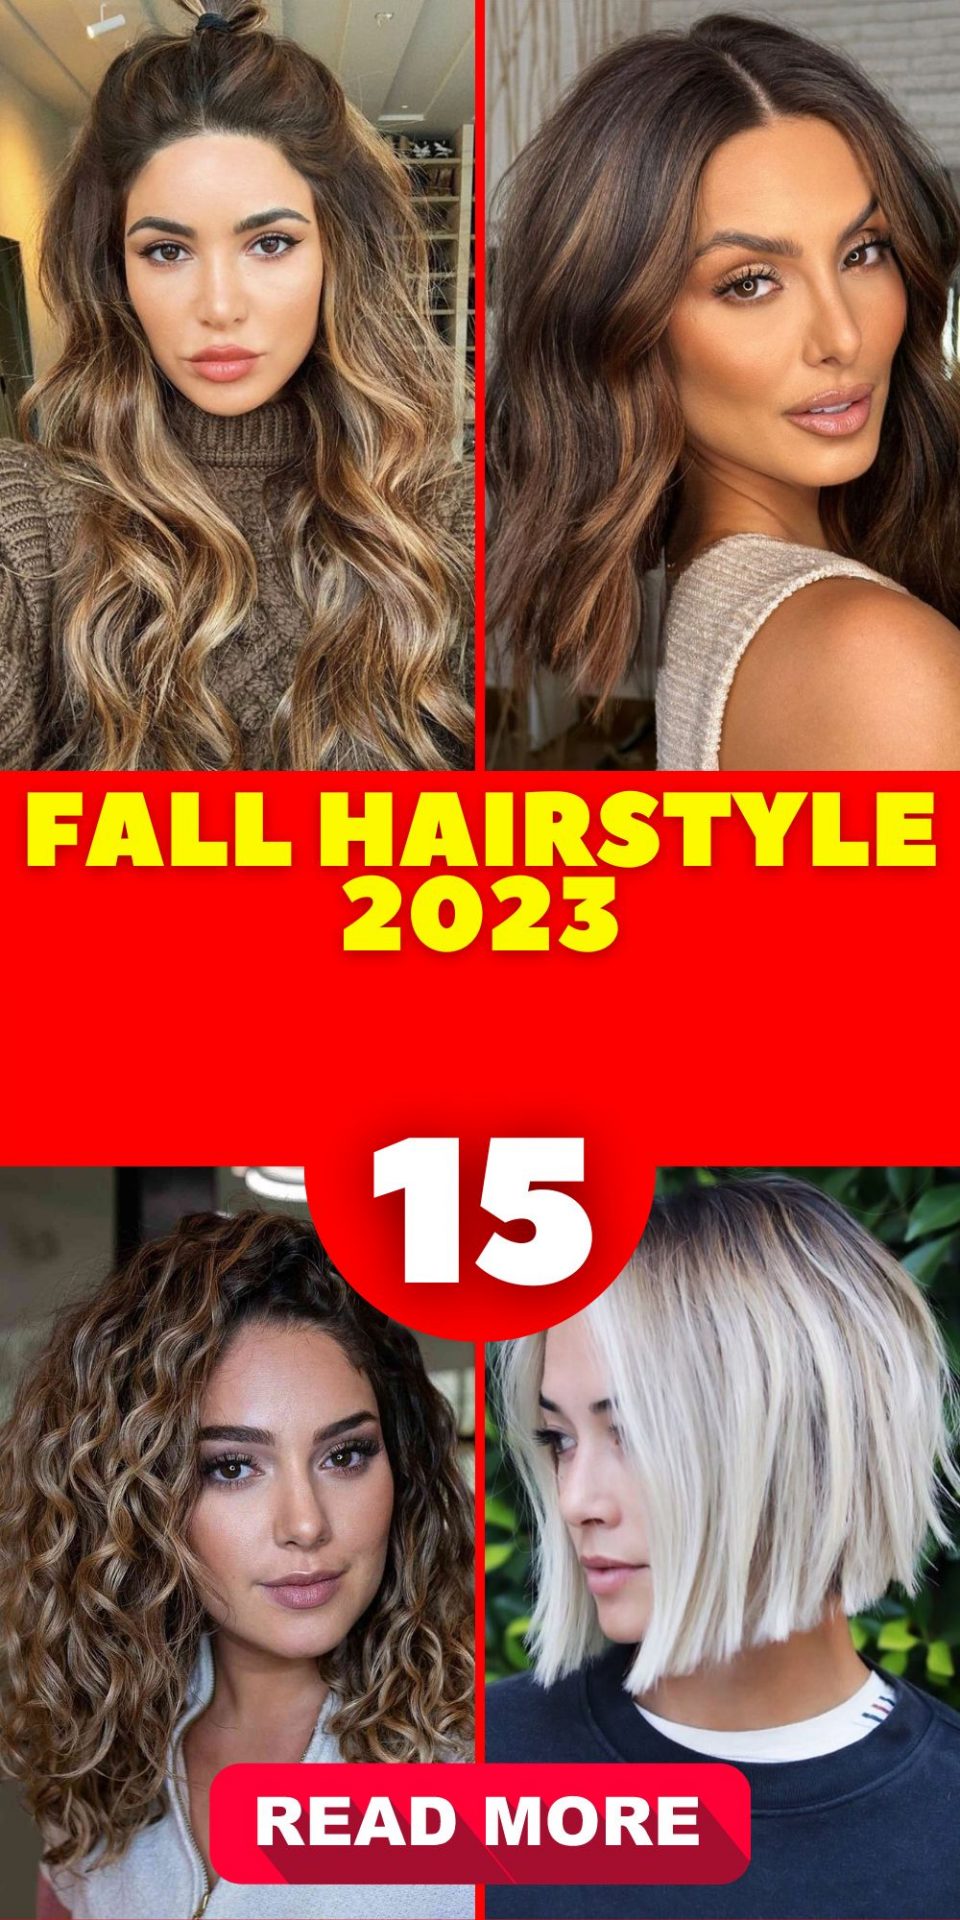 Fall Hairstyle 2023 15 Ideas Stay on Trend with the Latest Looks